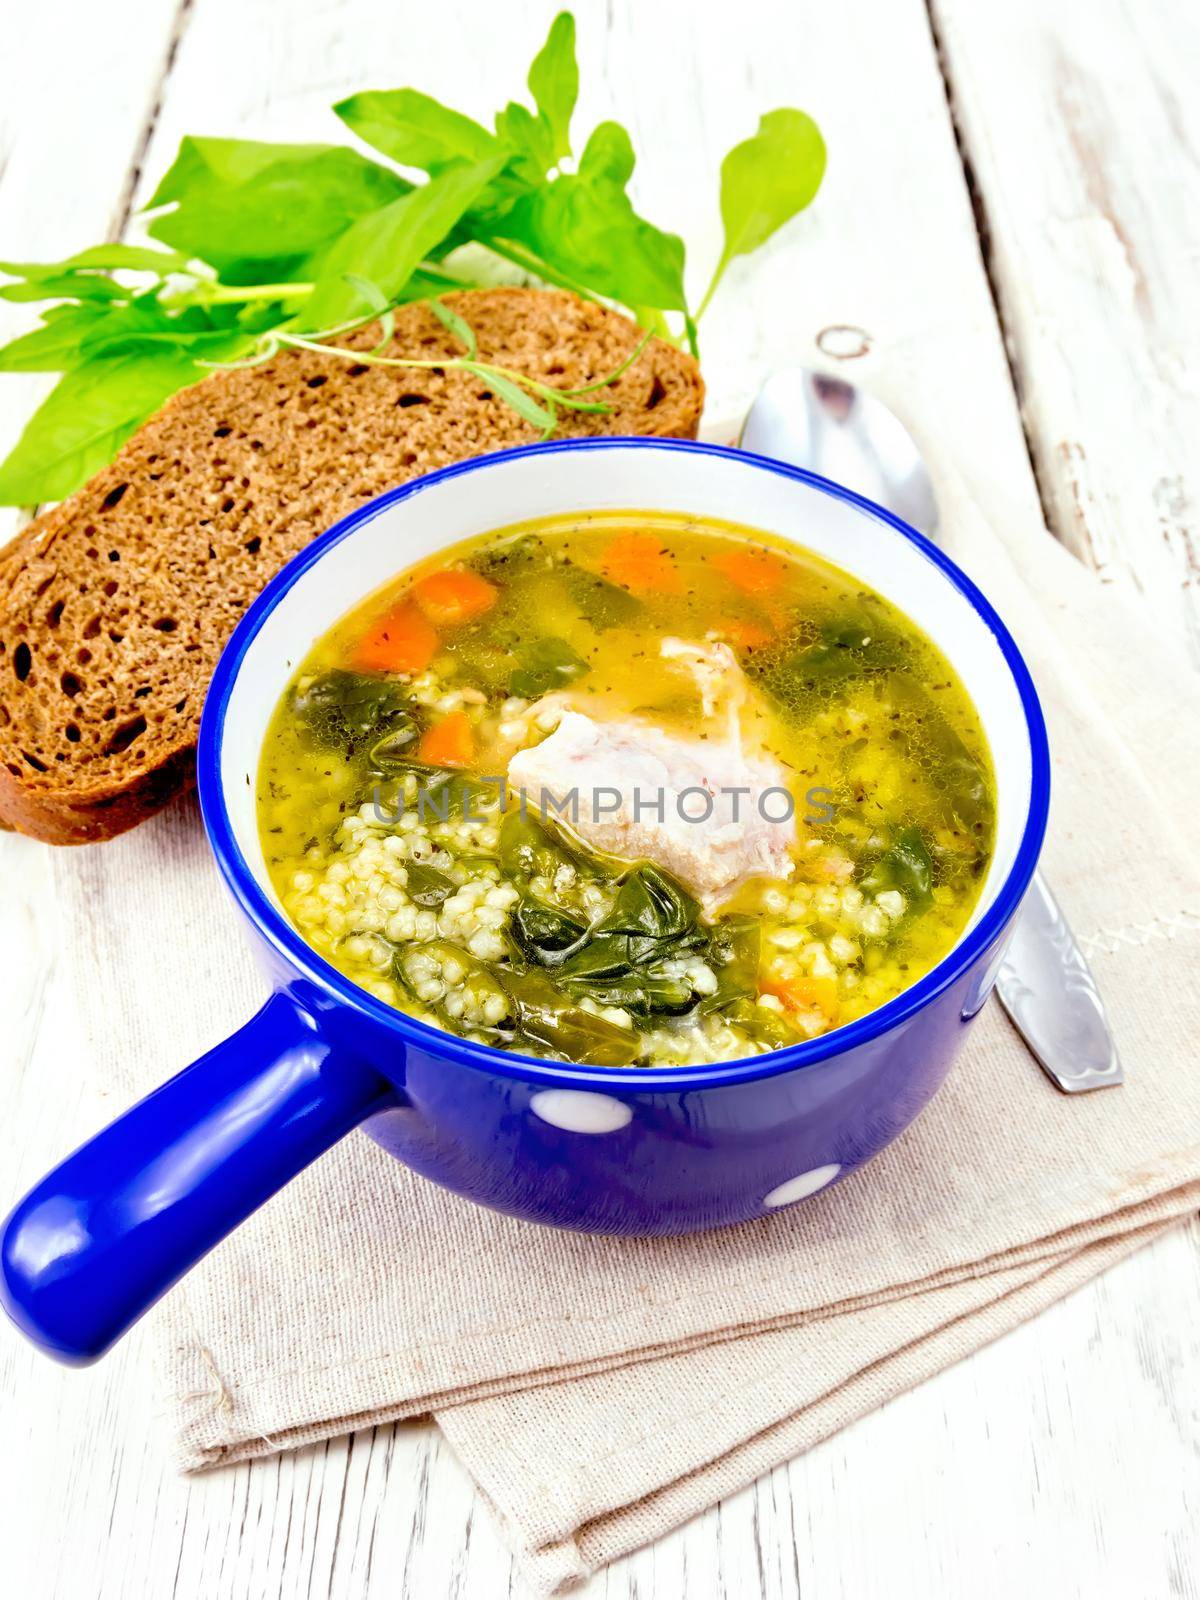 Pork ribs soup with couscous and spinach in a blue bowl on towel, bread on wooden board background